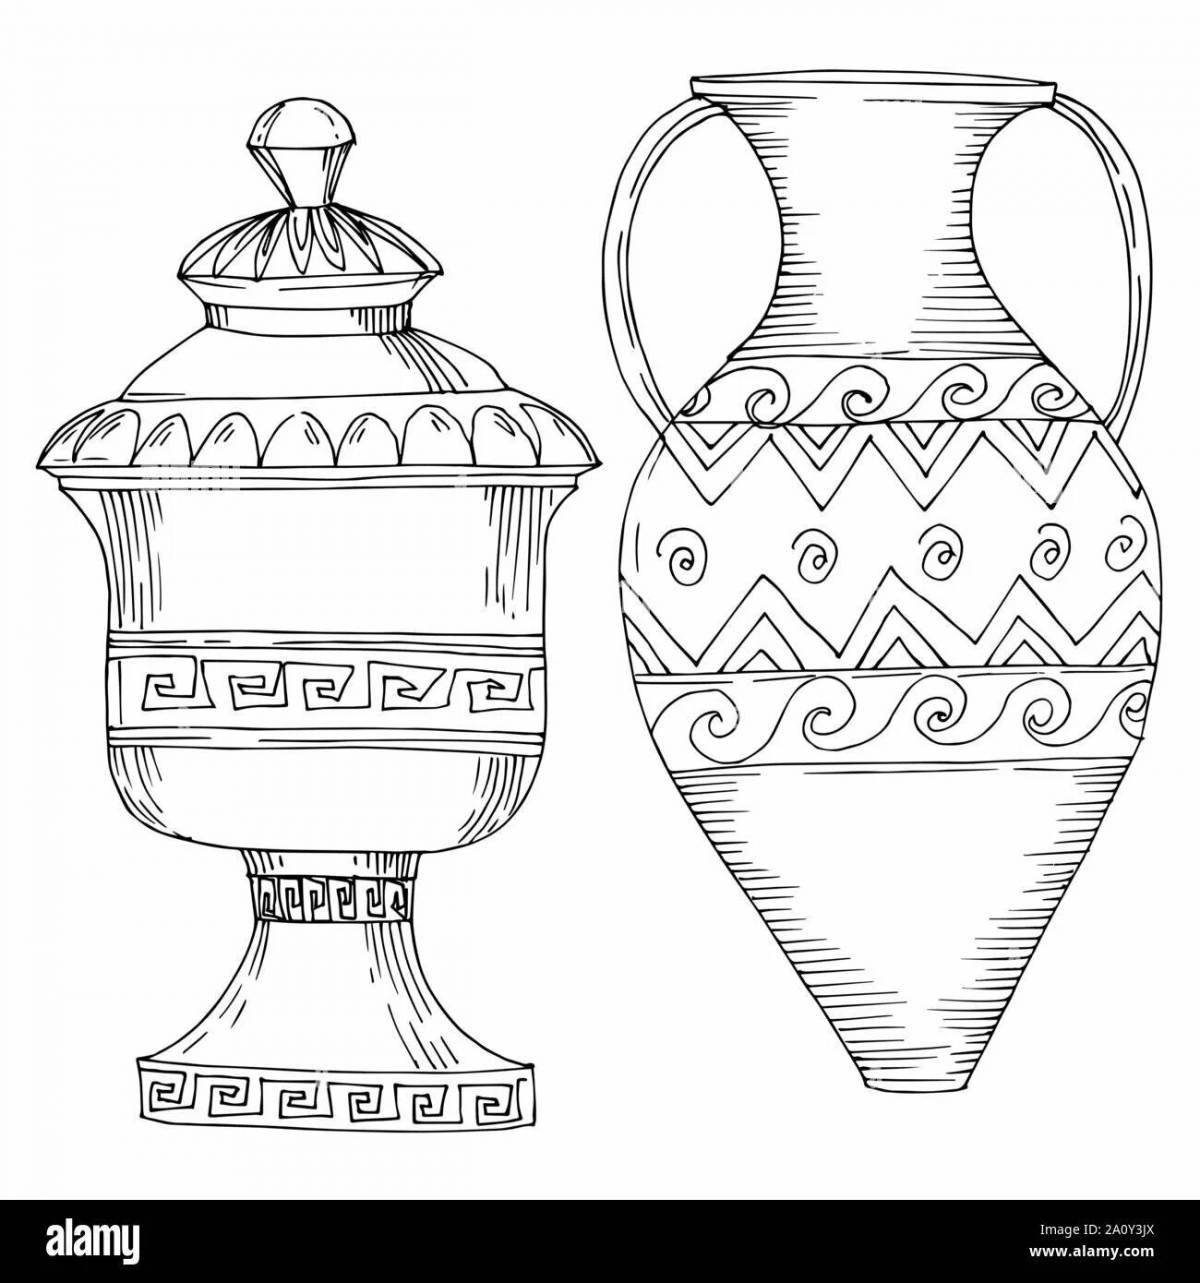 Coloring page of an intricate Greek vase